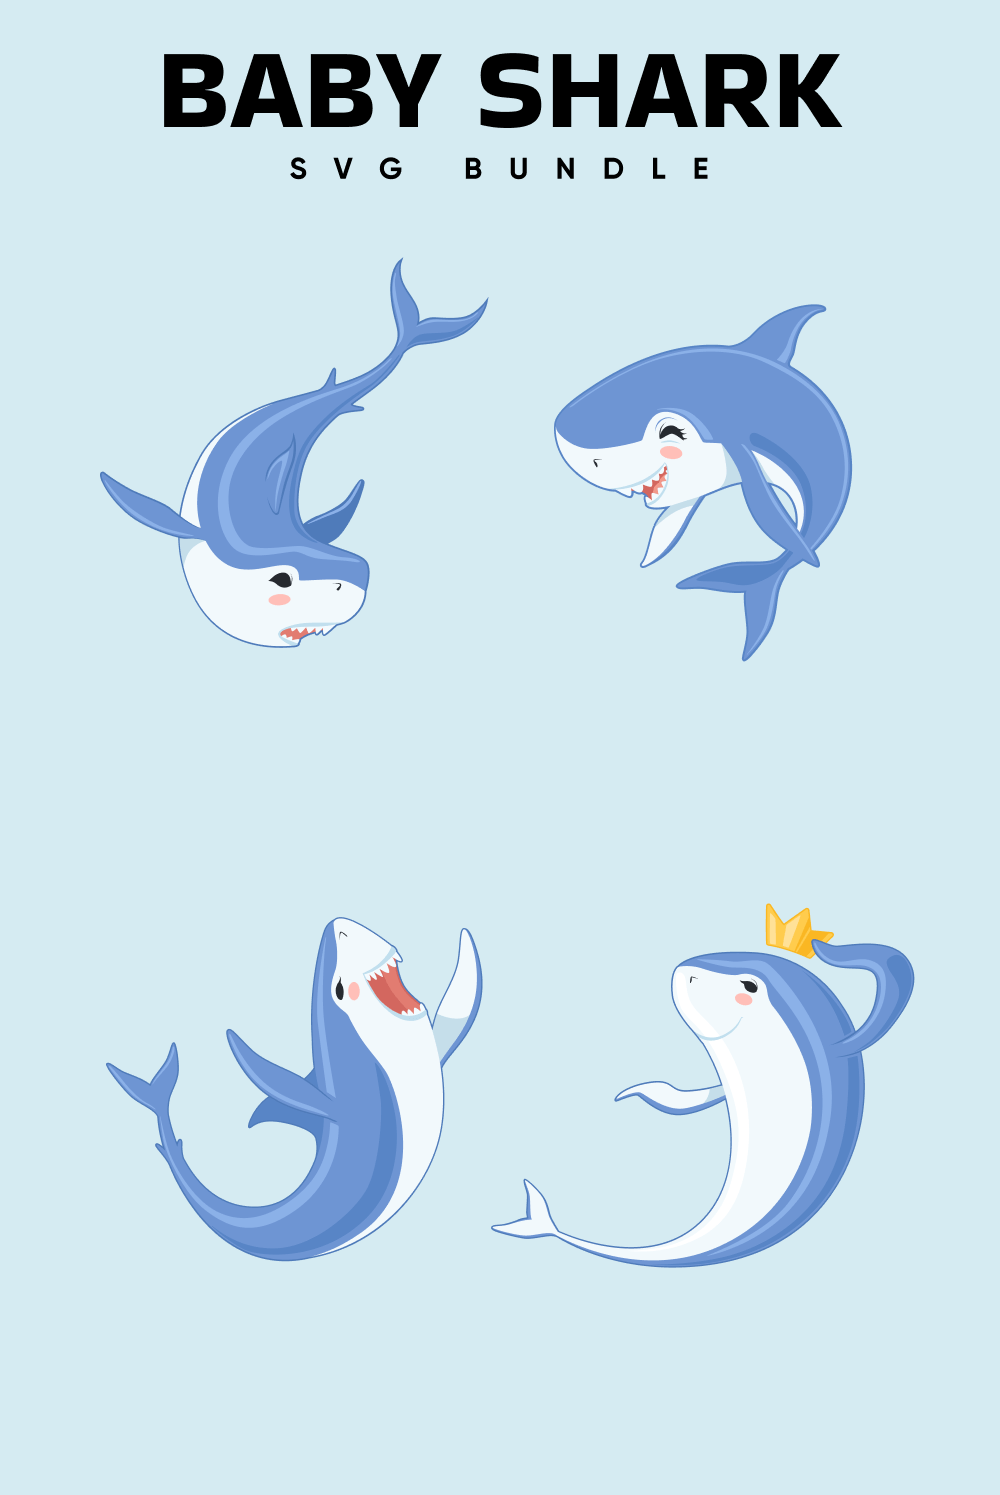 Little sharks with a crown on their heads.